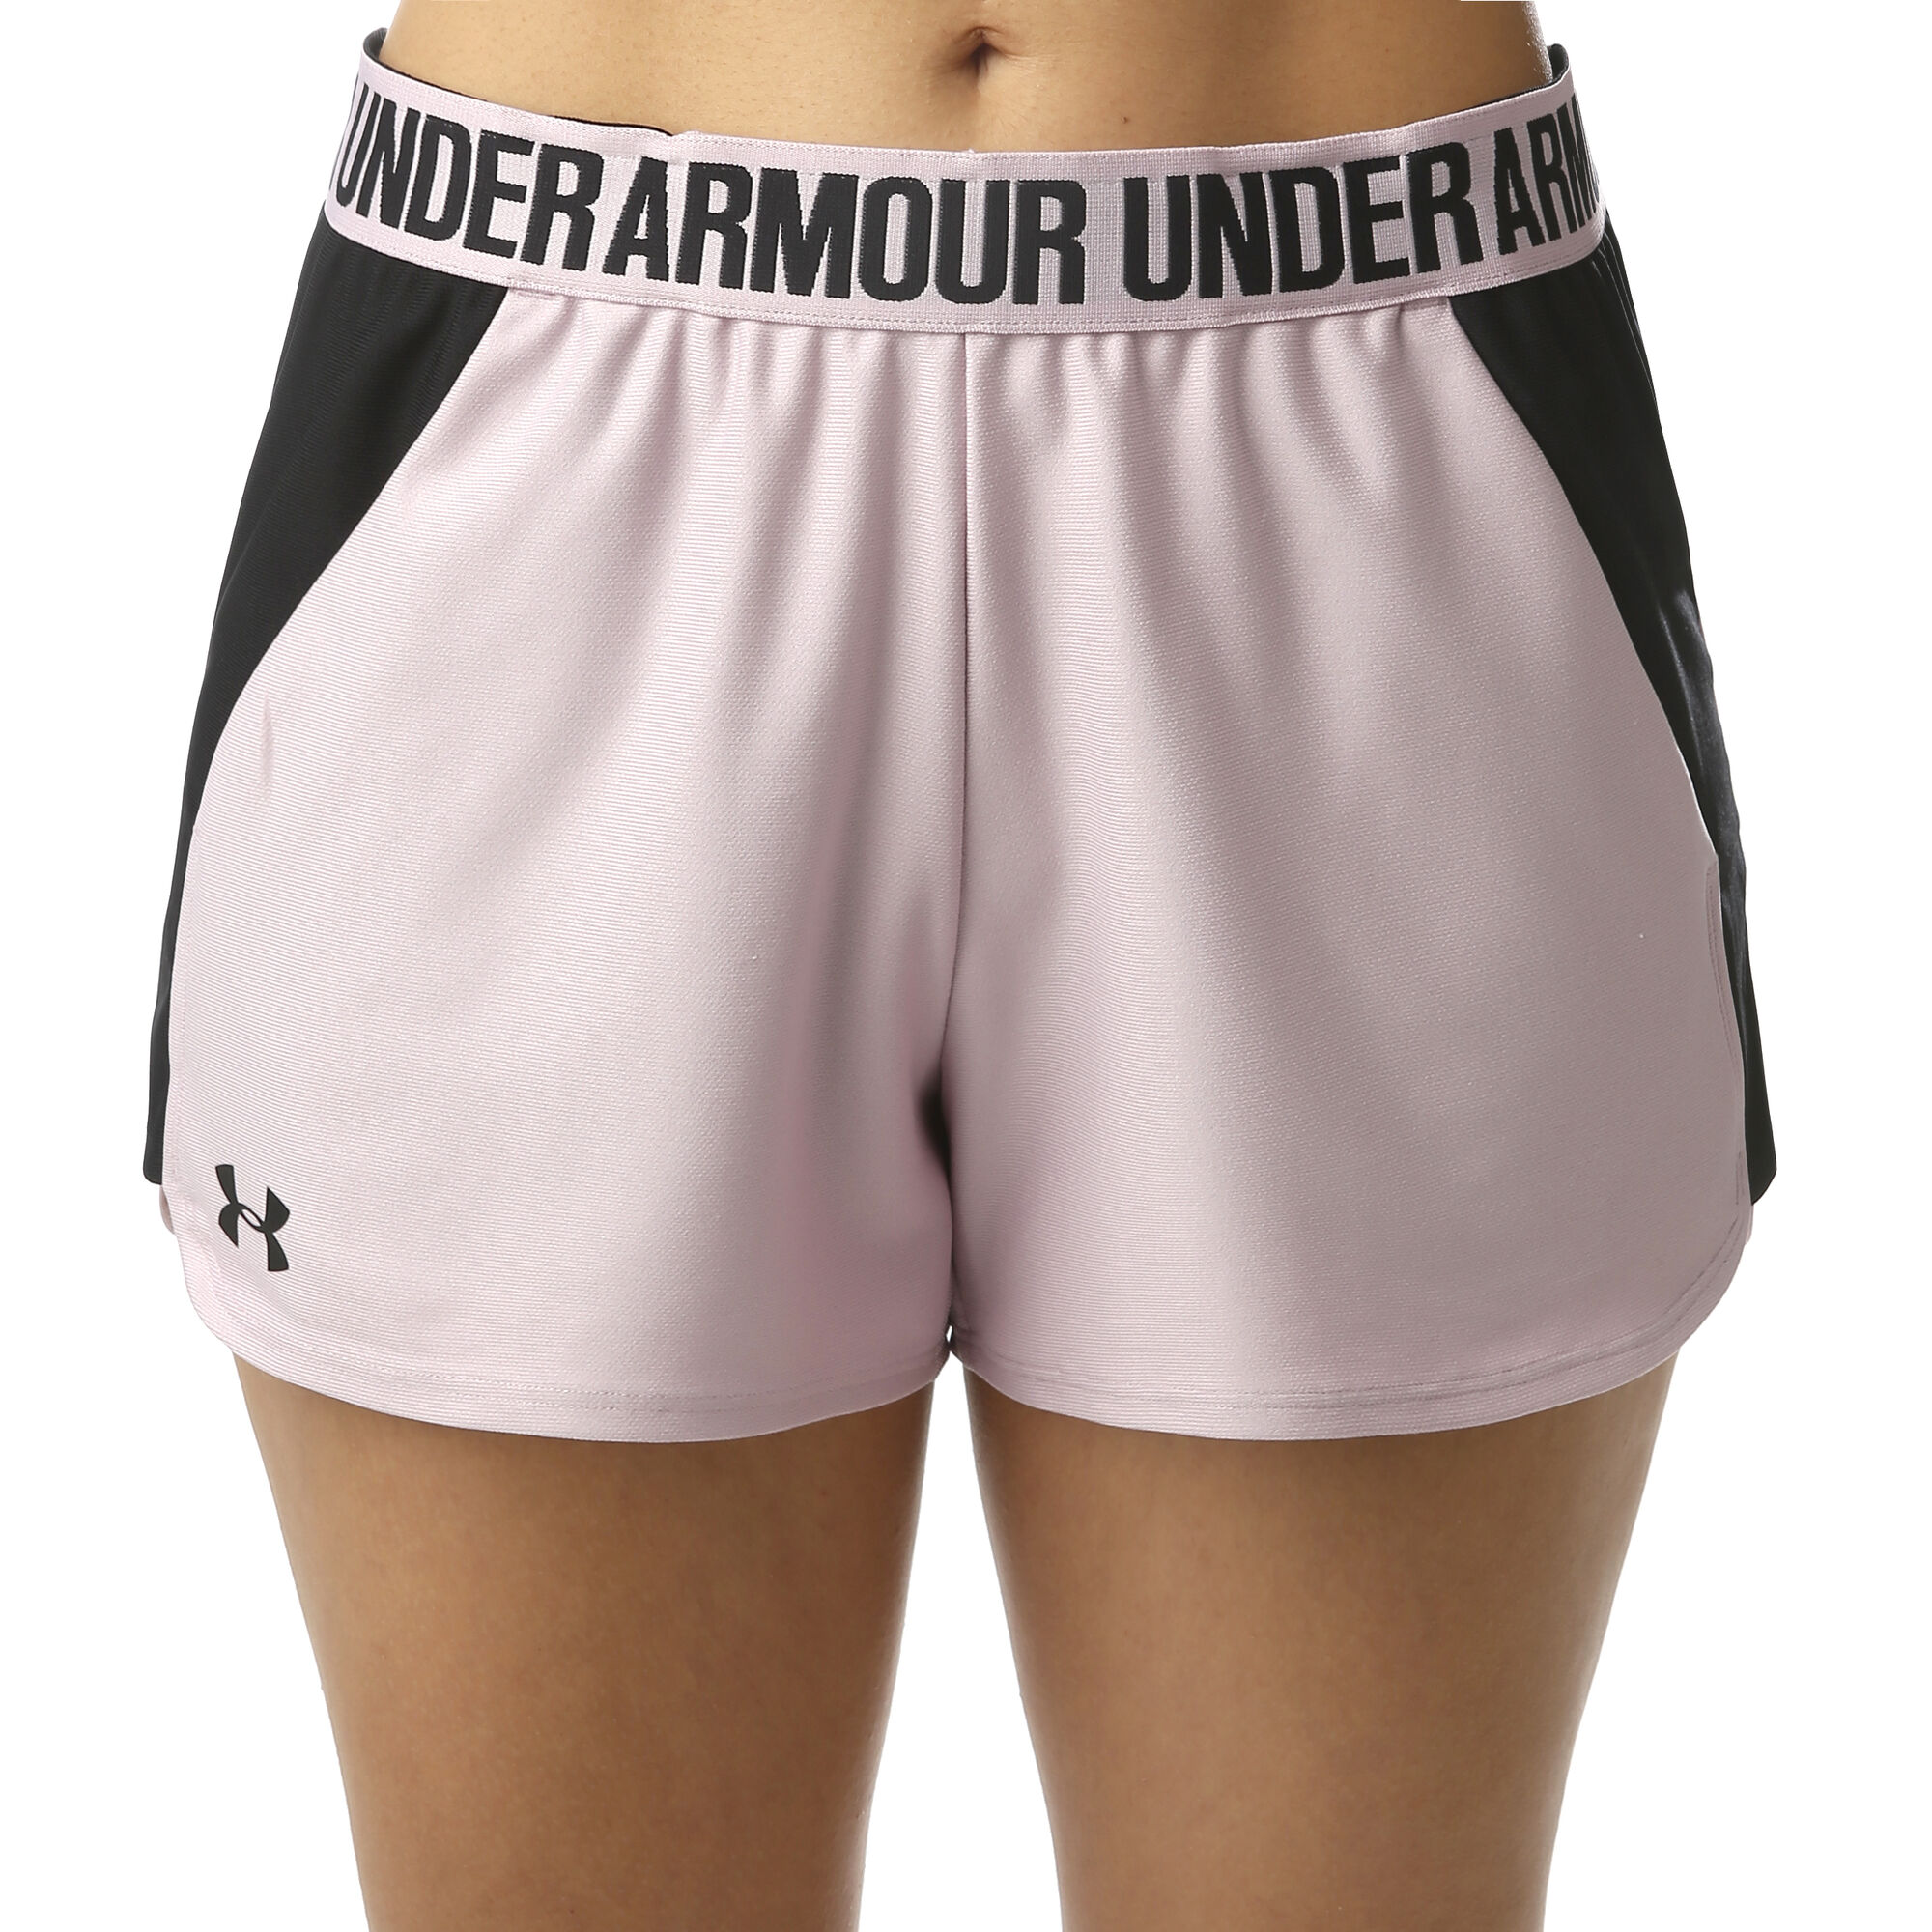 Under Armour Women's Play Up 2.0 Shorts